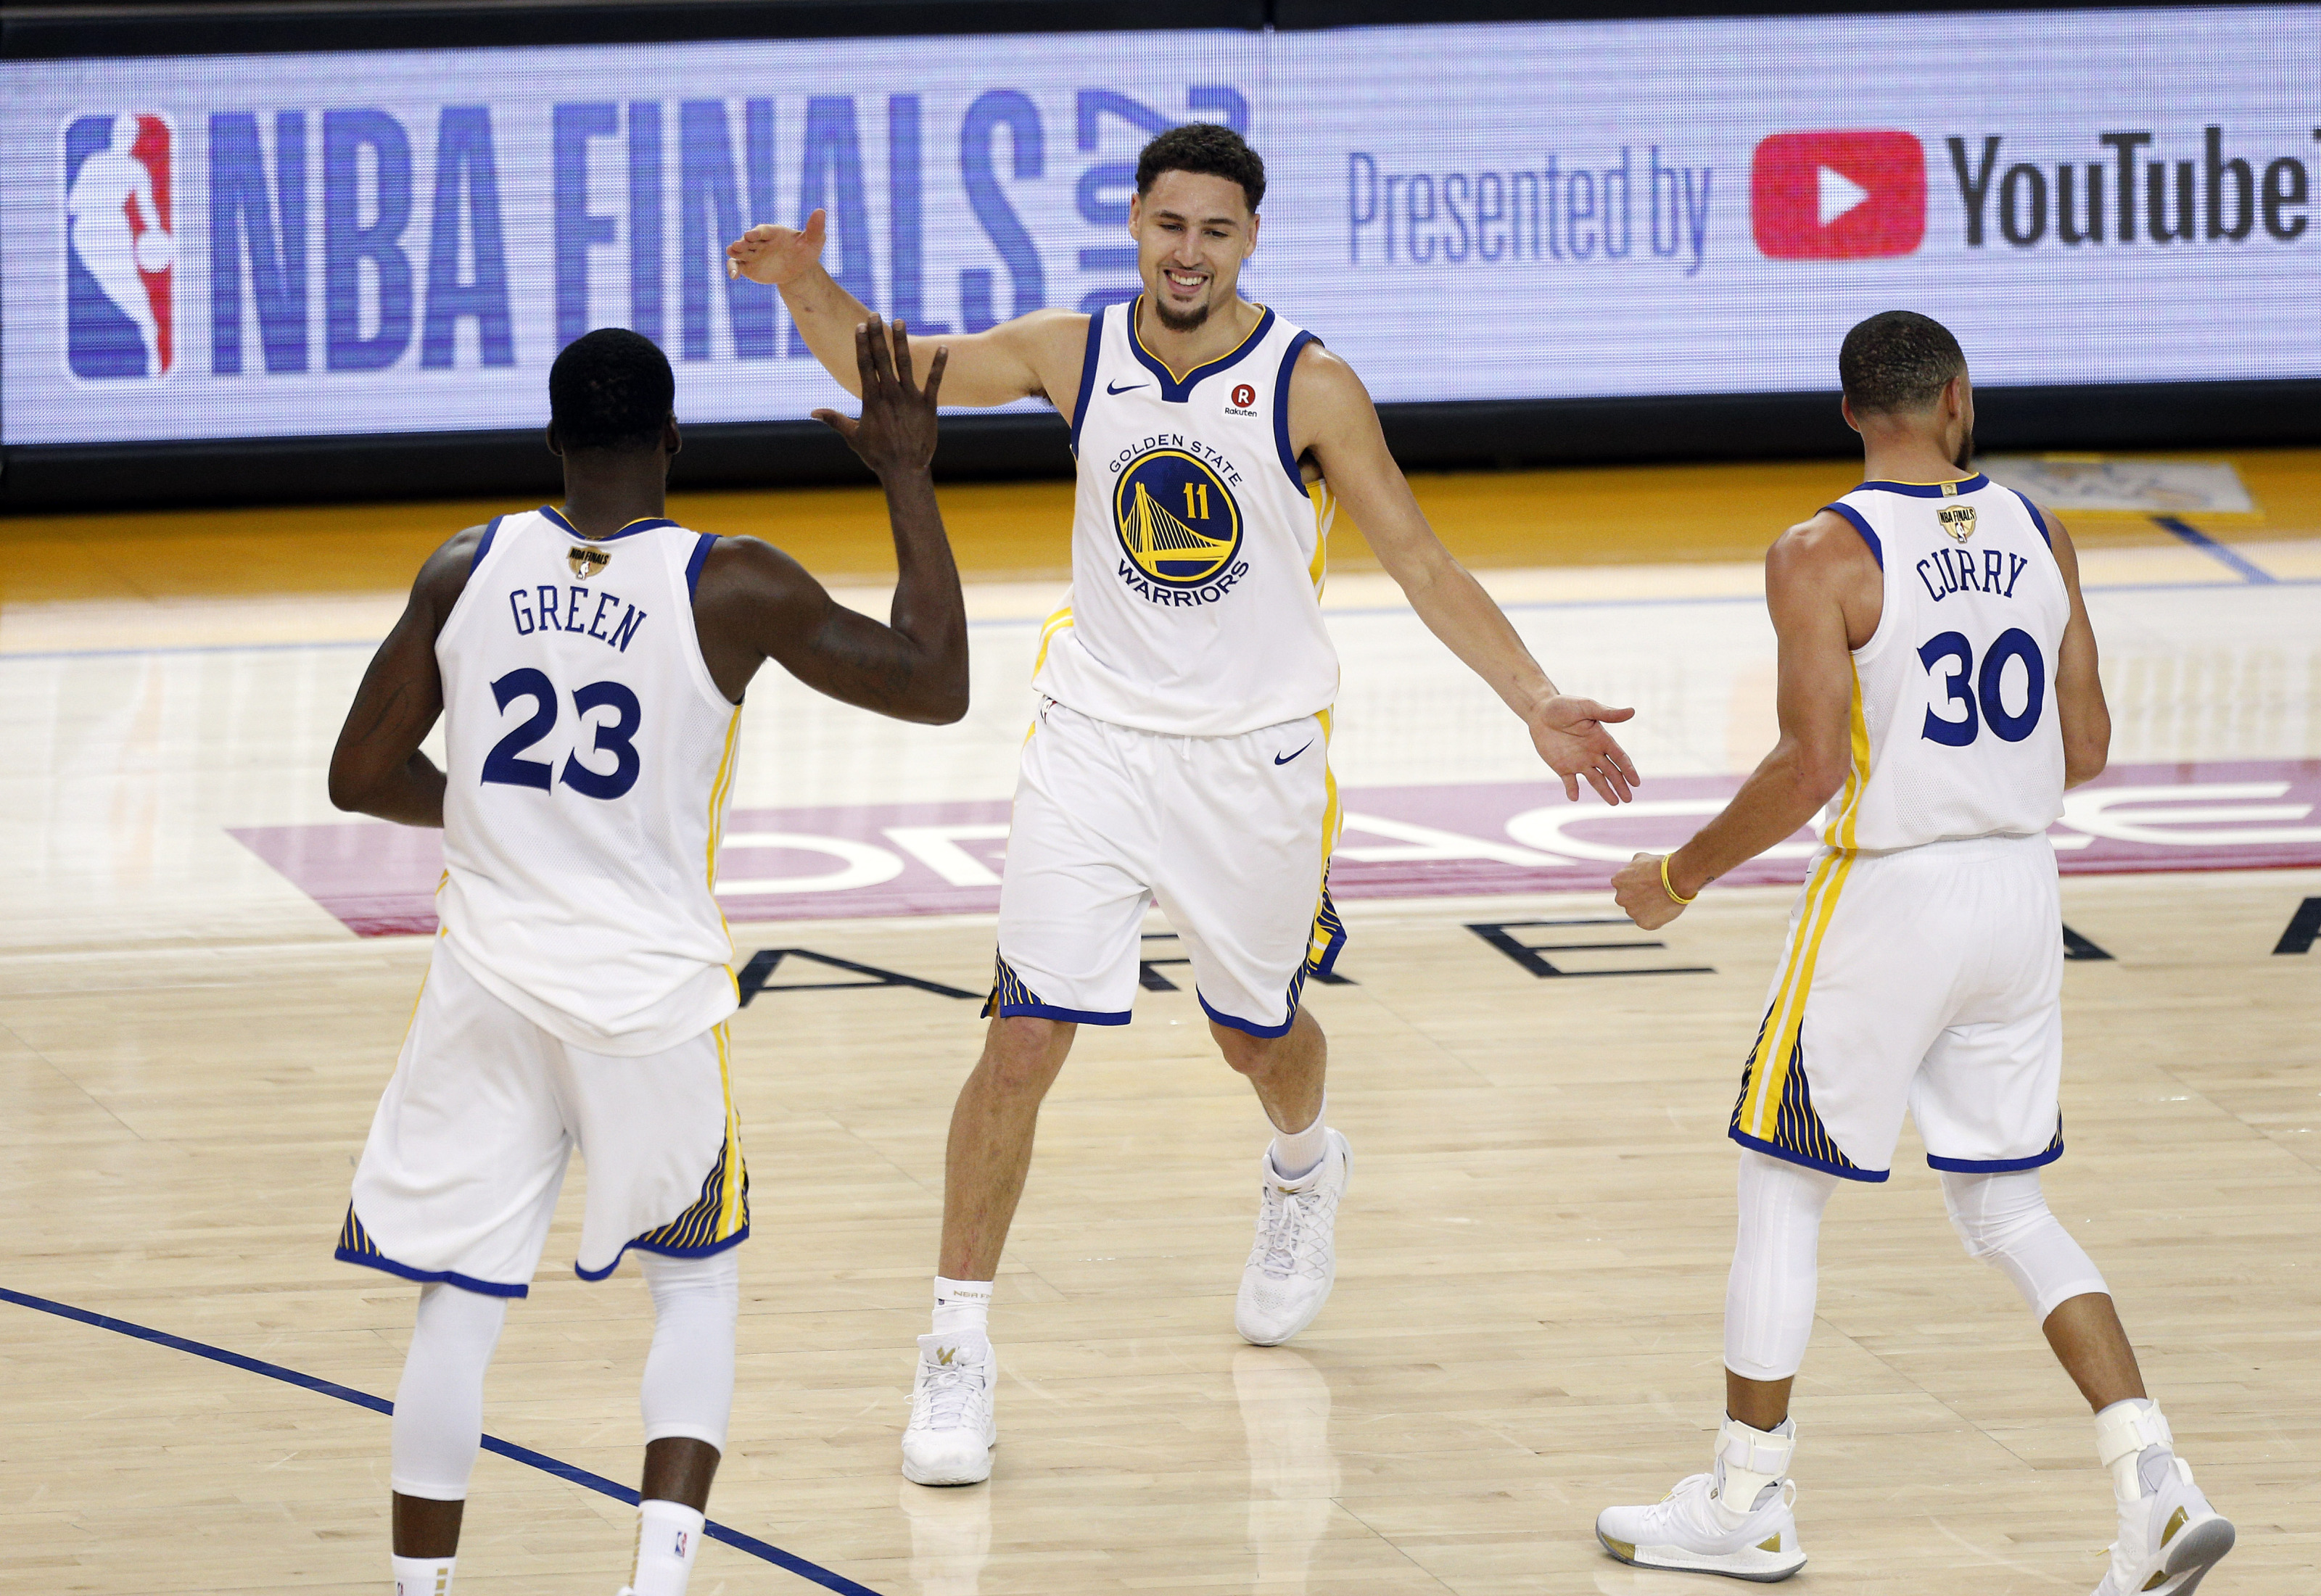 A long time coming: Warriors' Green joins Curry, Thompson on the court